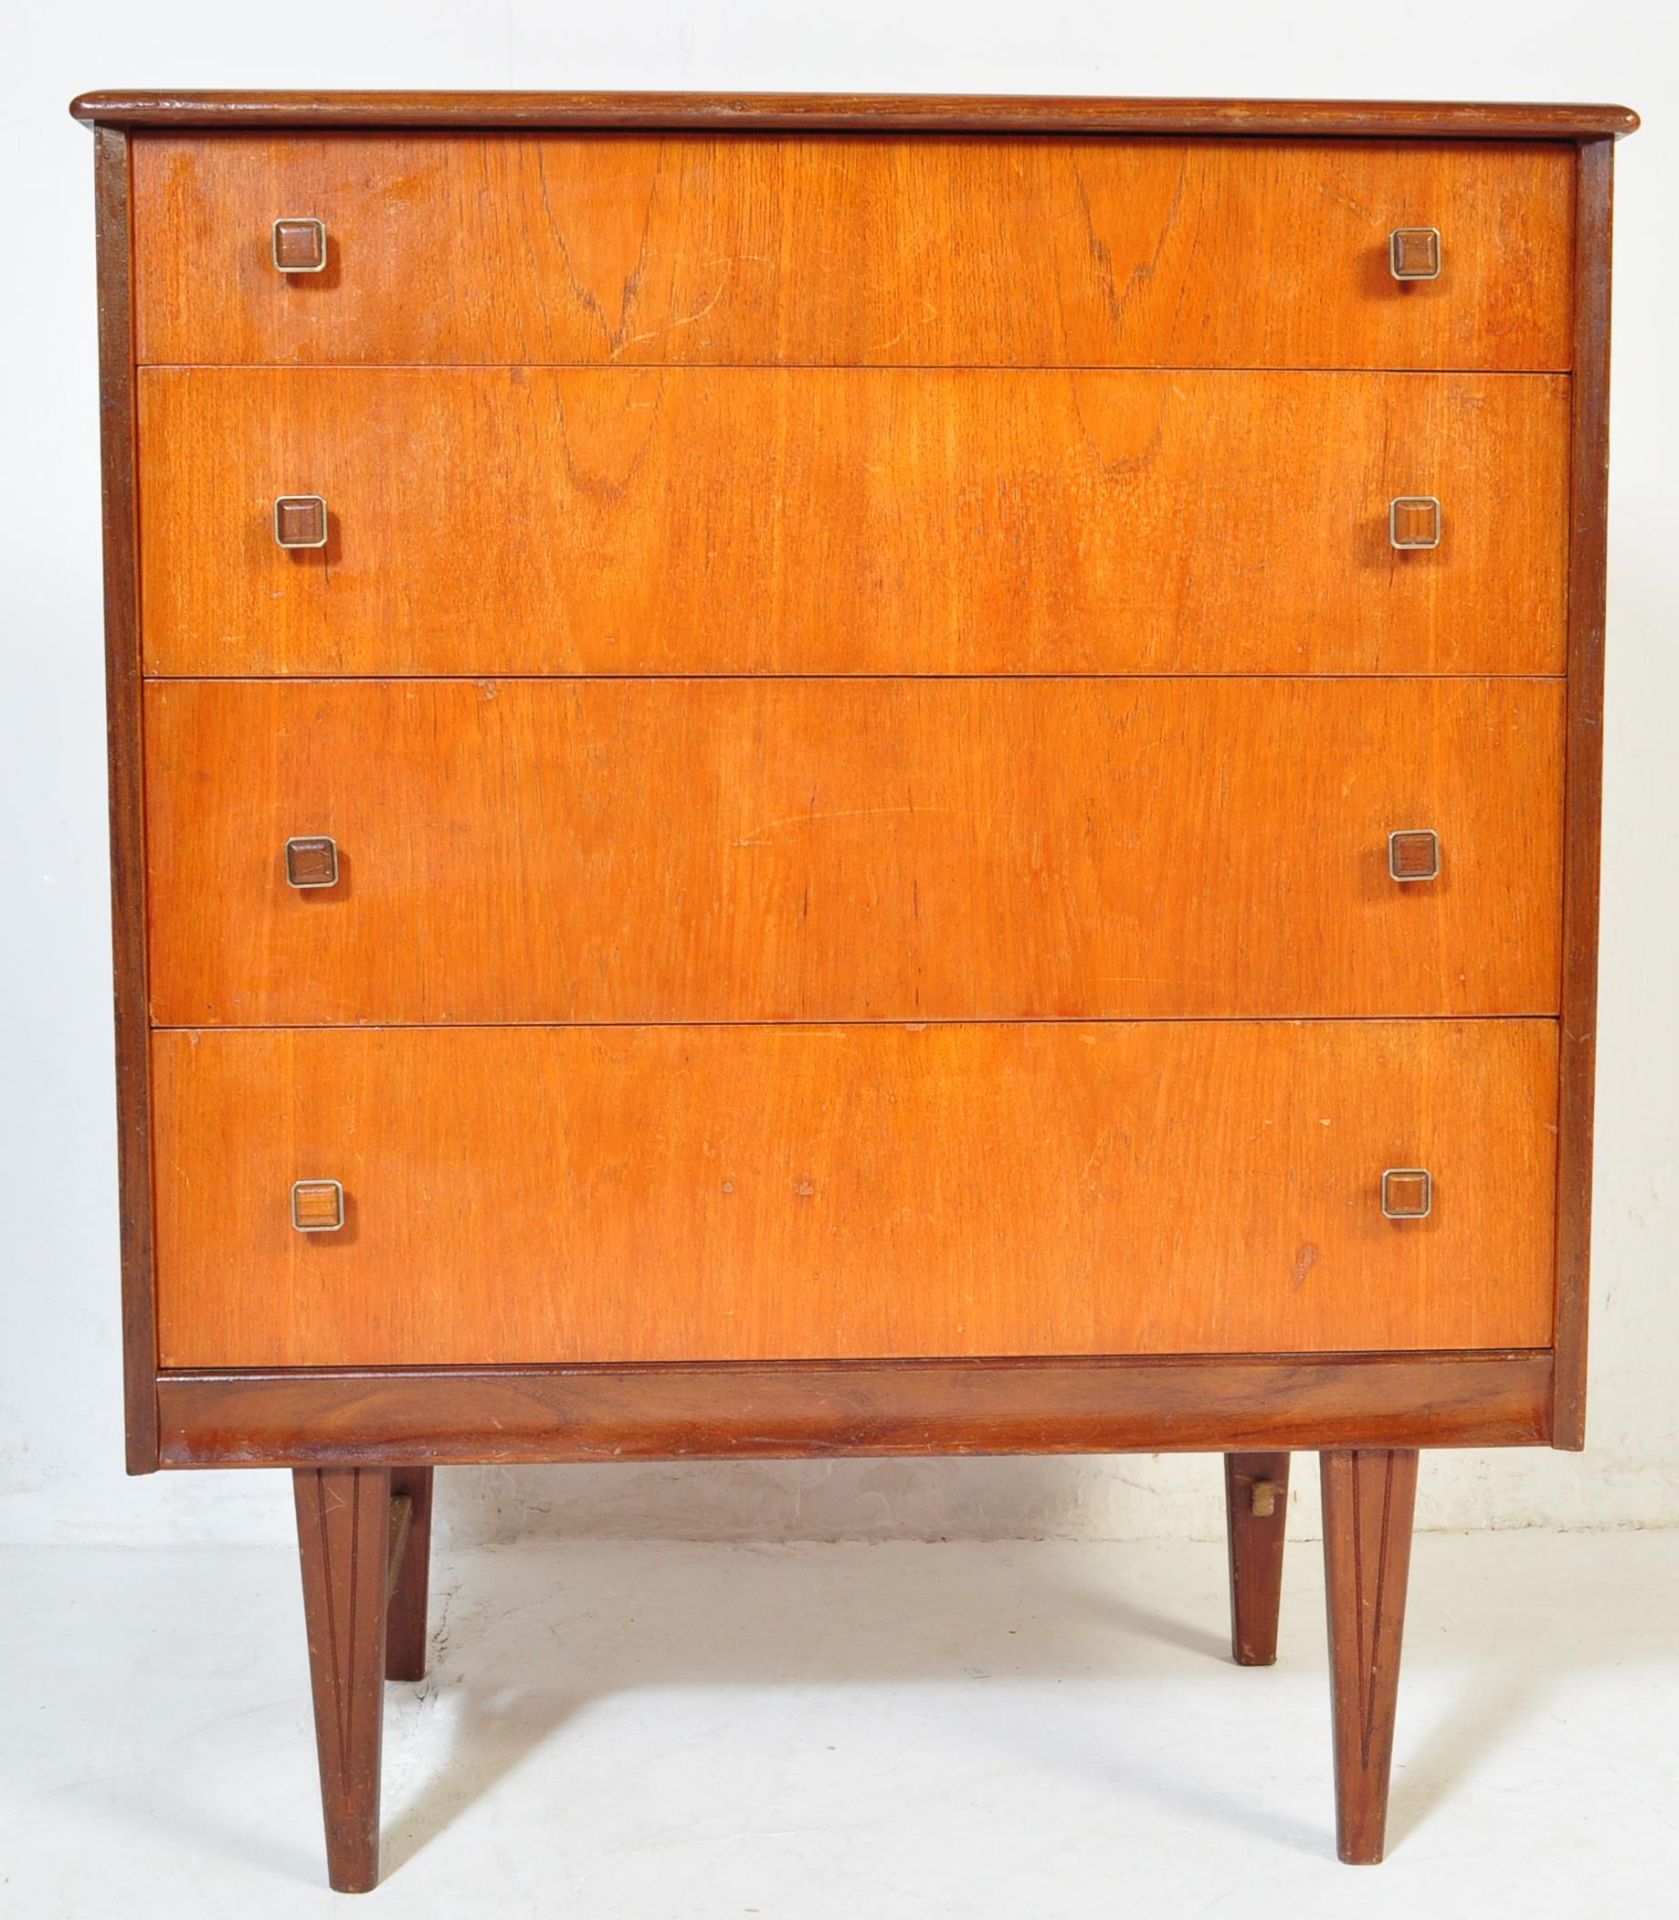 MID 20TH CENTURY TEAK CHEST OF DRAWERS - Image 3 of 5